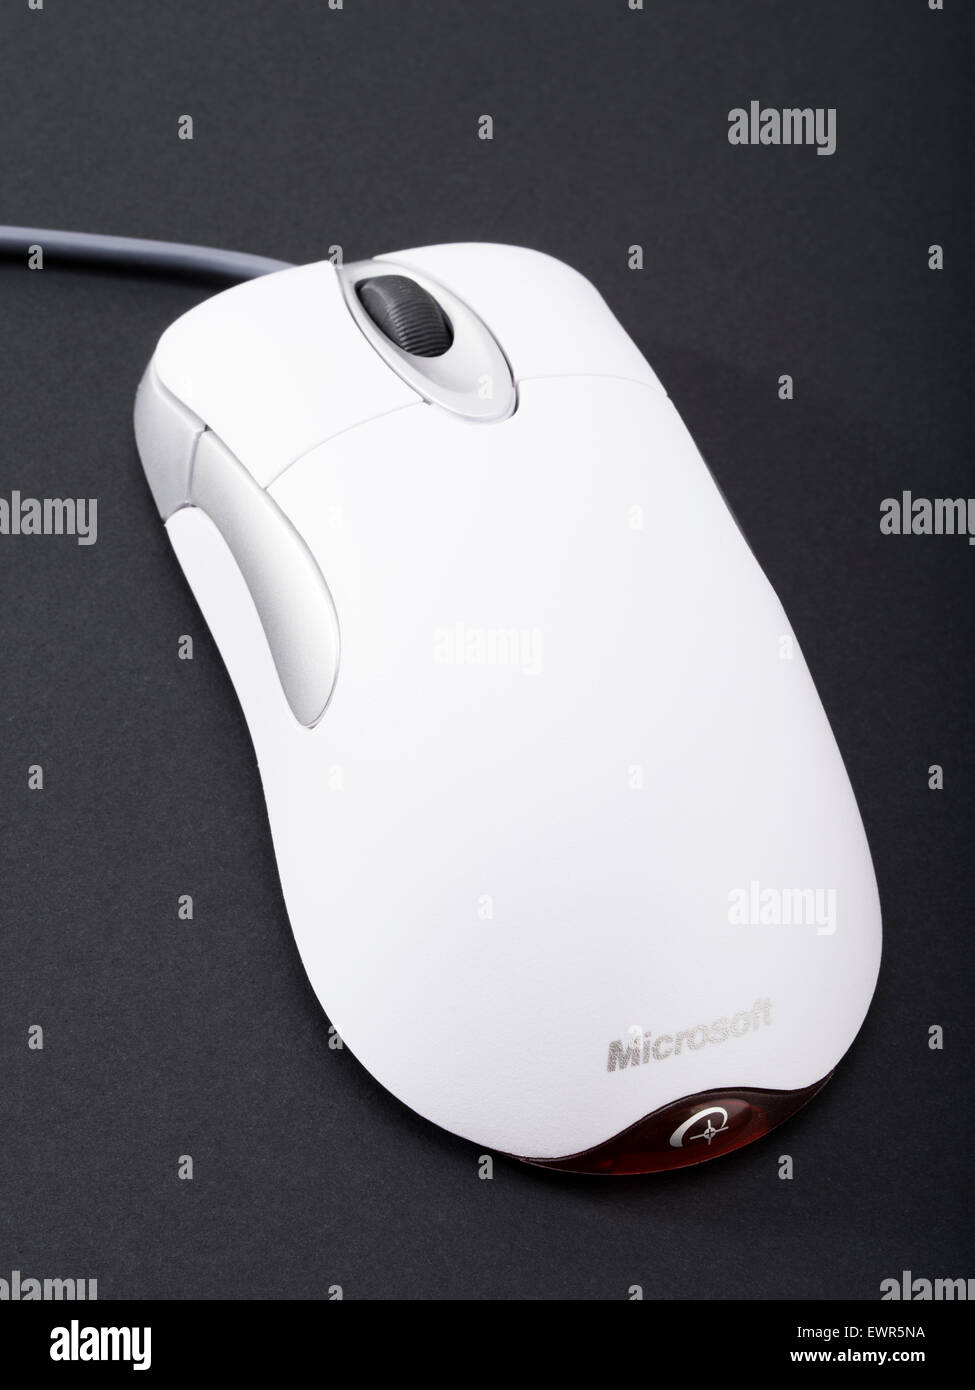 Microsoft IntelliMouse IO 1.1  was introduced in 1996 Optical USB Wired Mouse Stock Photo